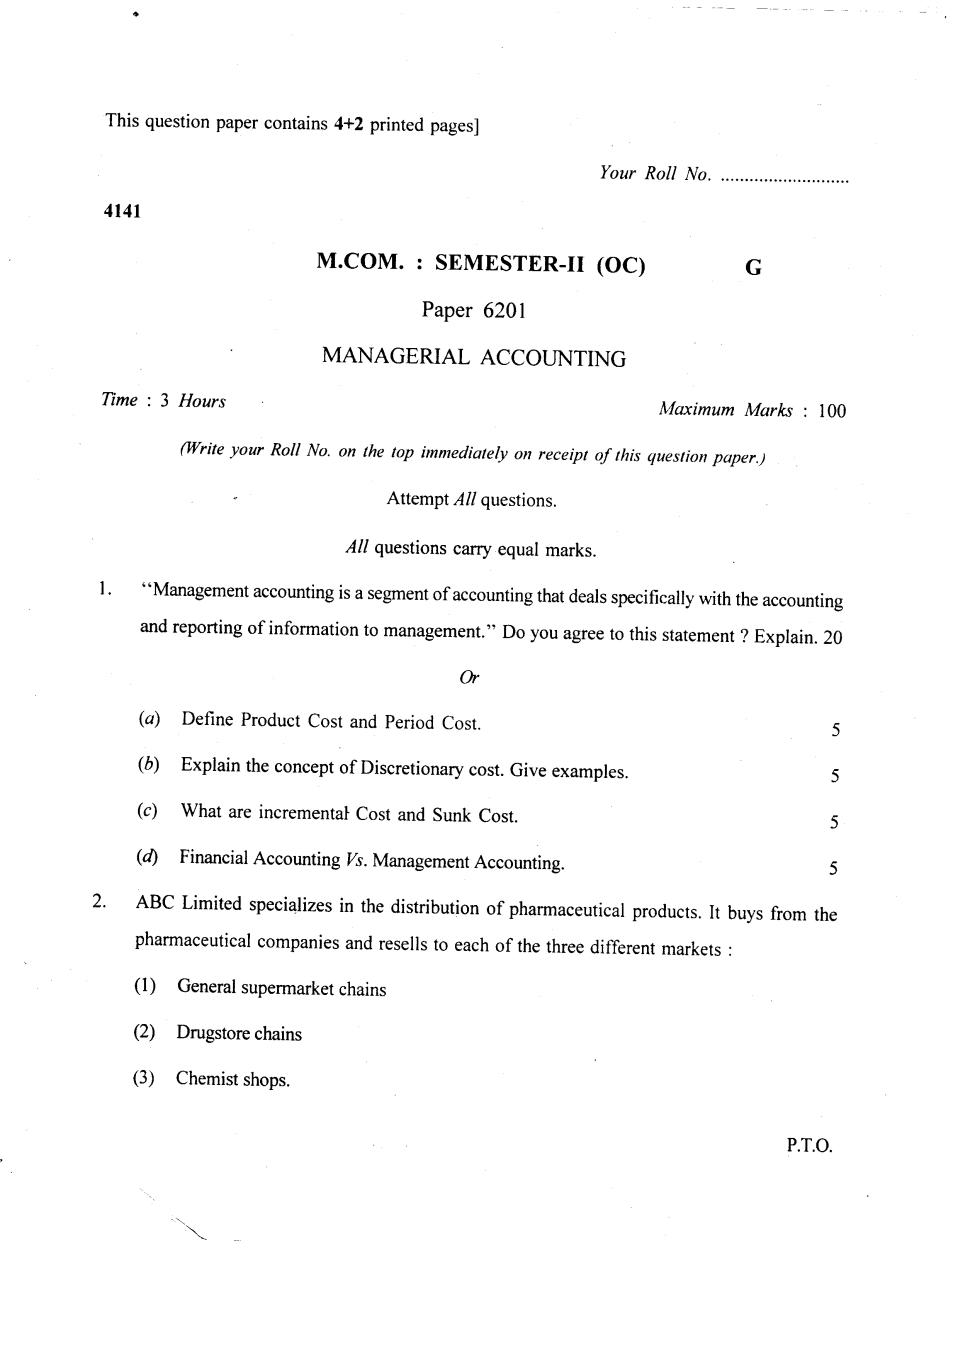 DU SOL M.Com Question Paper 1st Year 2018 Sem 2 Managerial Accounting - Page 1